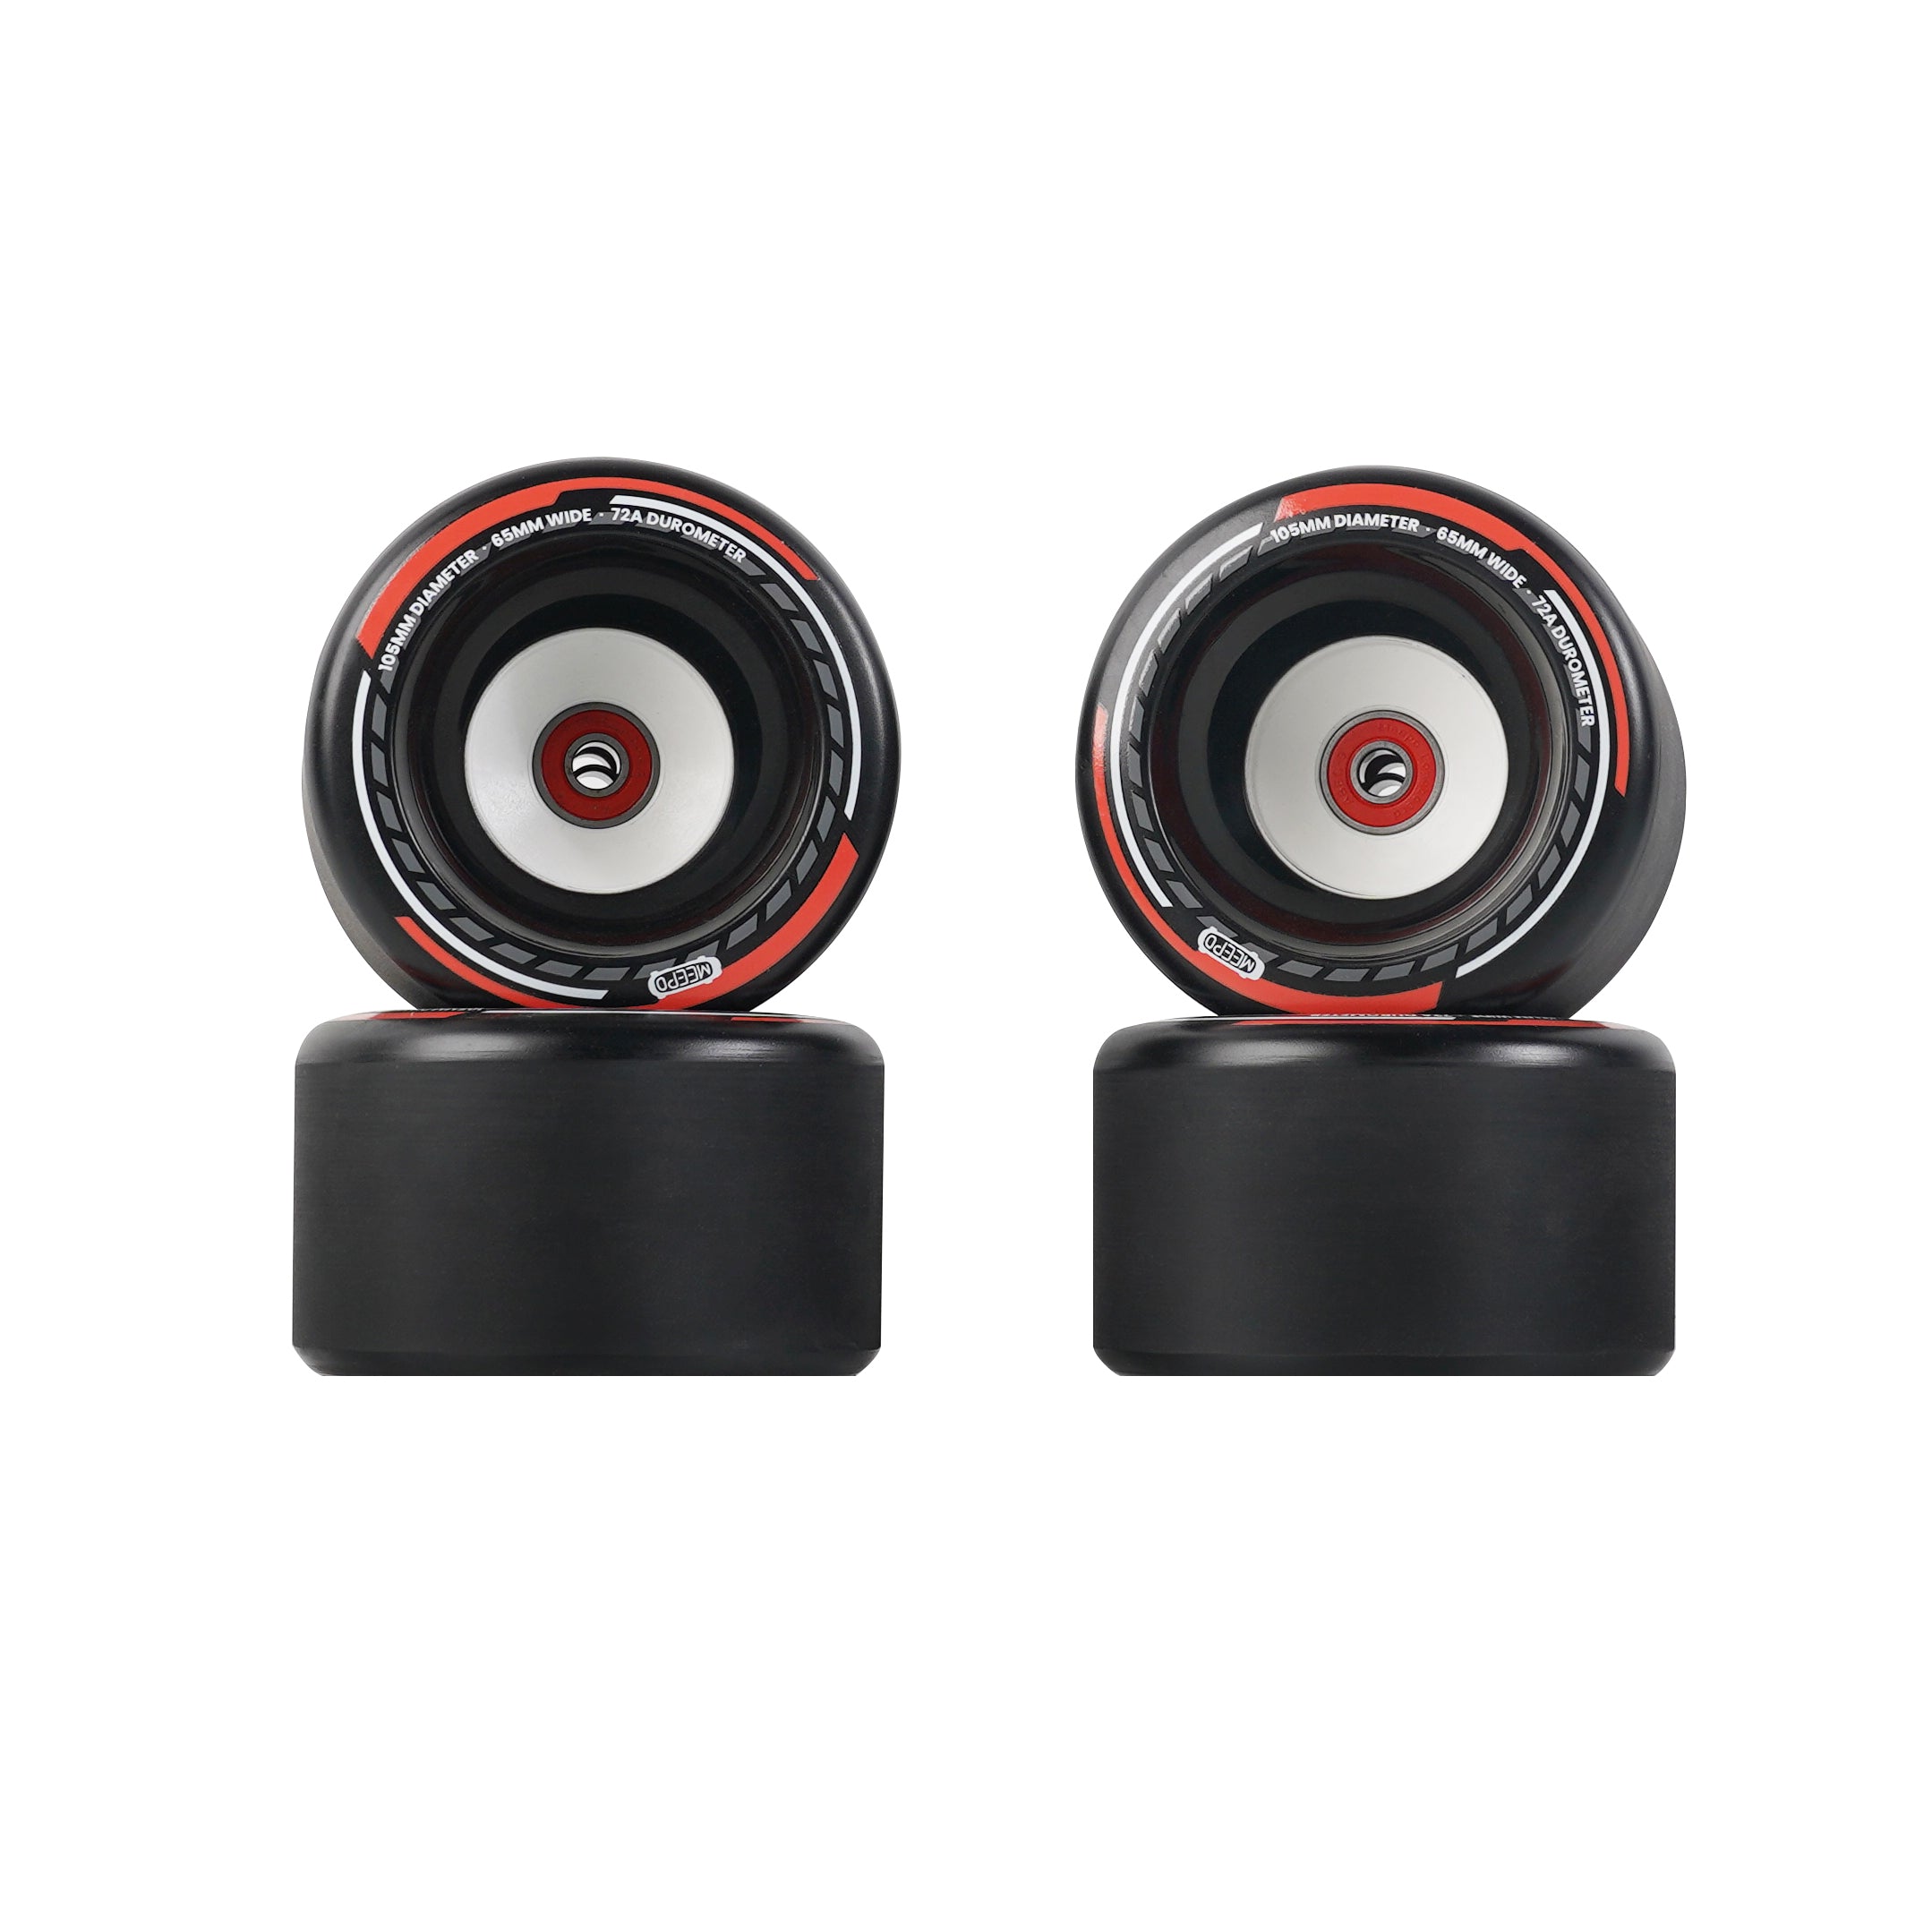 Meepo Cyclone 105s wheels Set - Next-Level Street Wheels with Enhanced Grip and Unmatched Shock Absorption